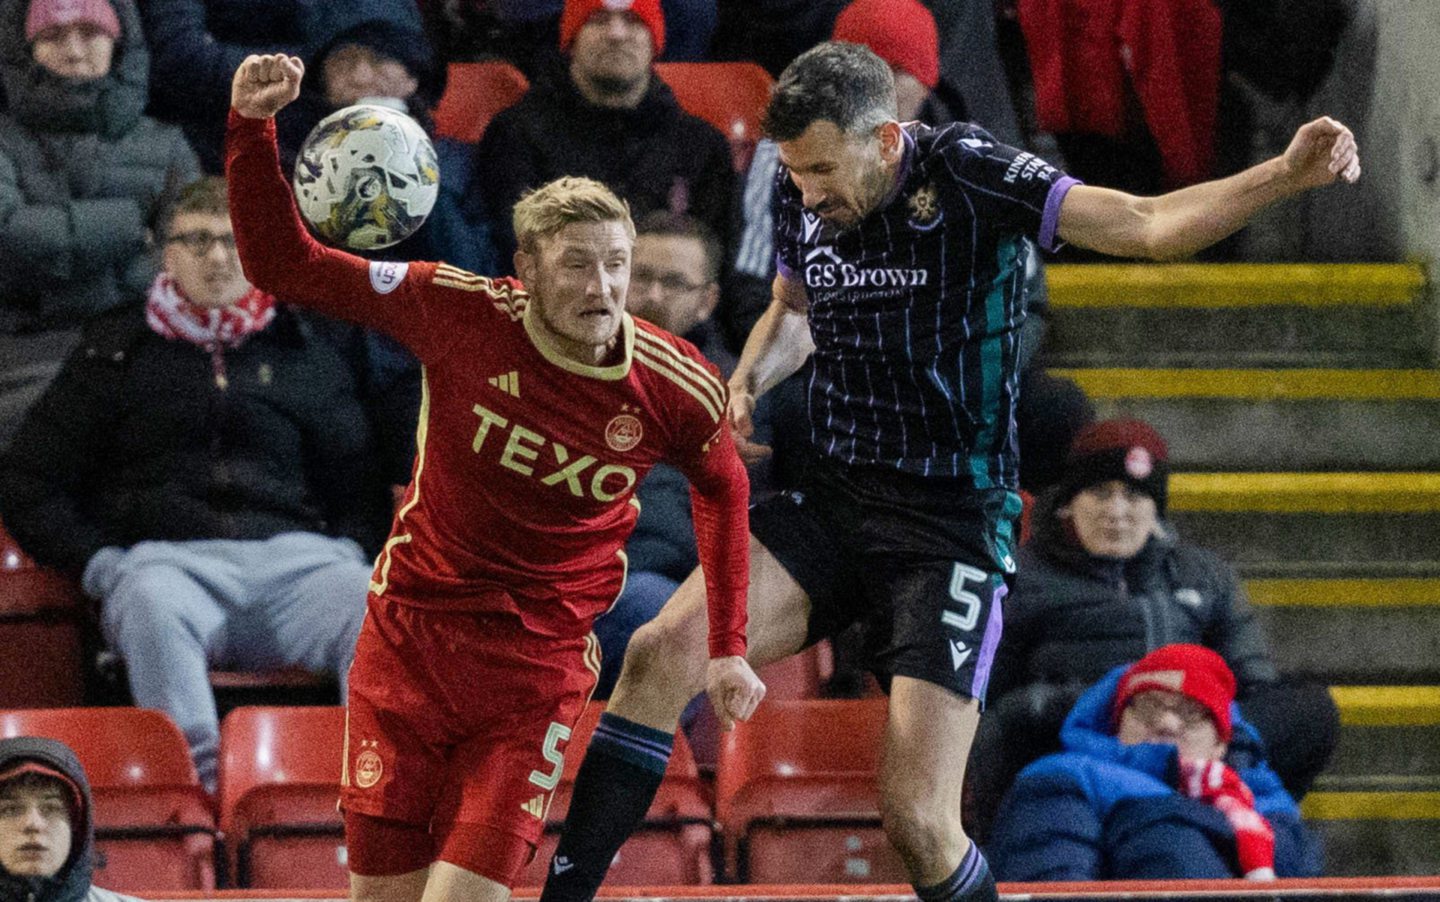 Dons' Richard Jensen is judged to have handled the ball which led to a penalty and St Johnstone's opener.